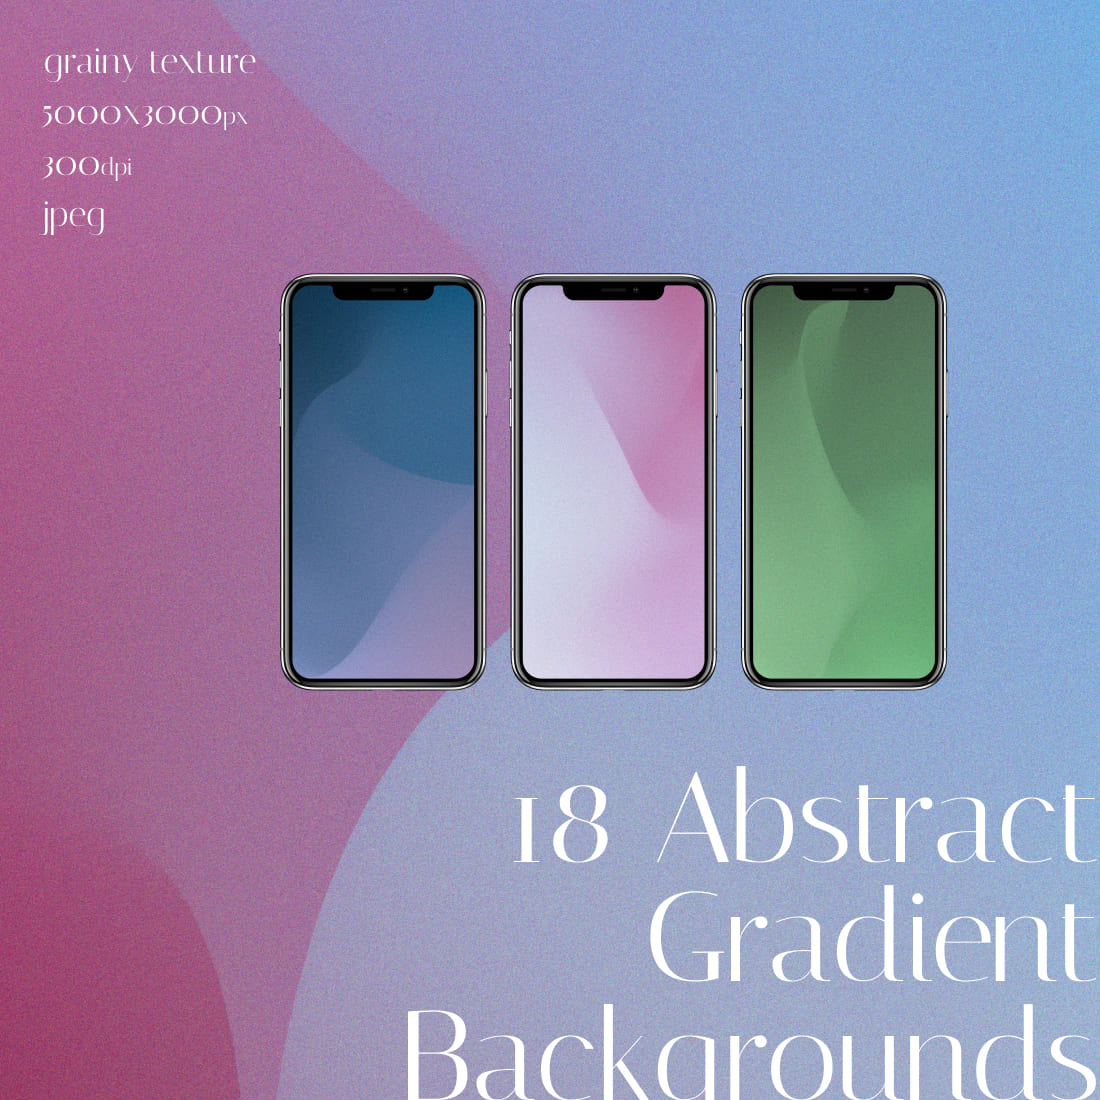 Colorful Abstract Gradient Backgrounds Design cover image.